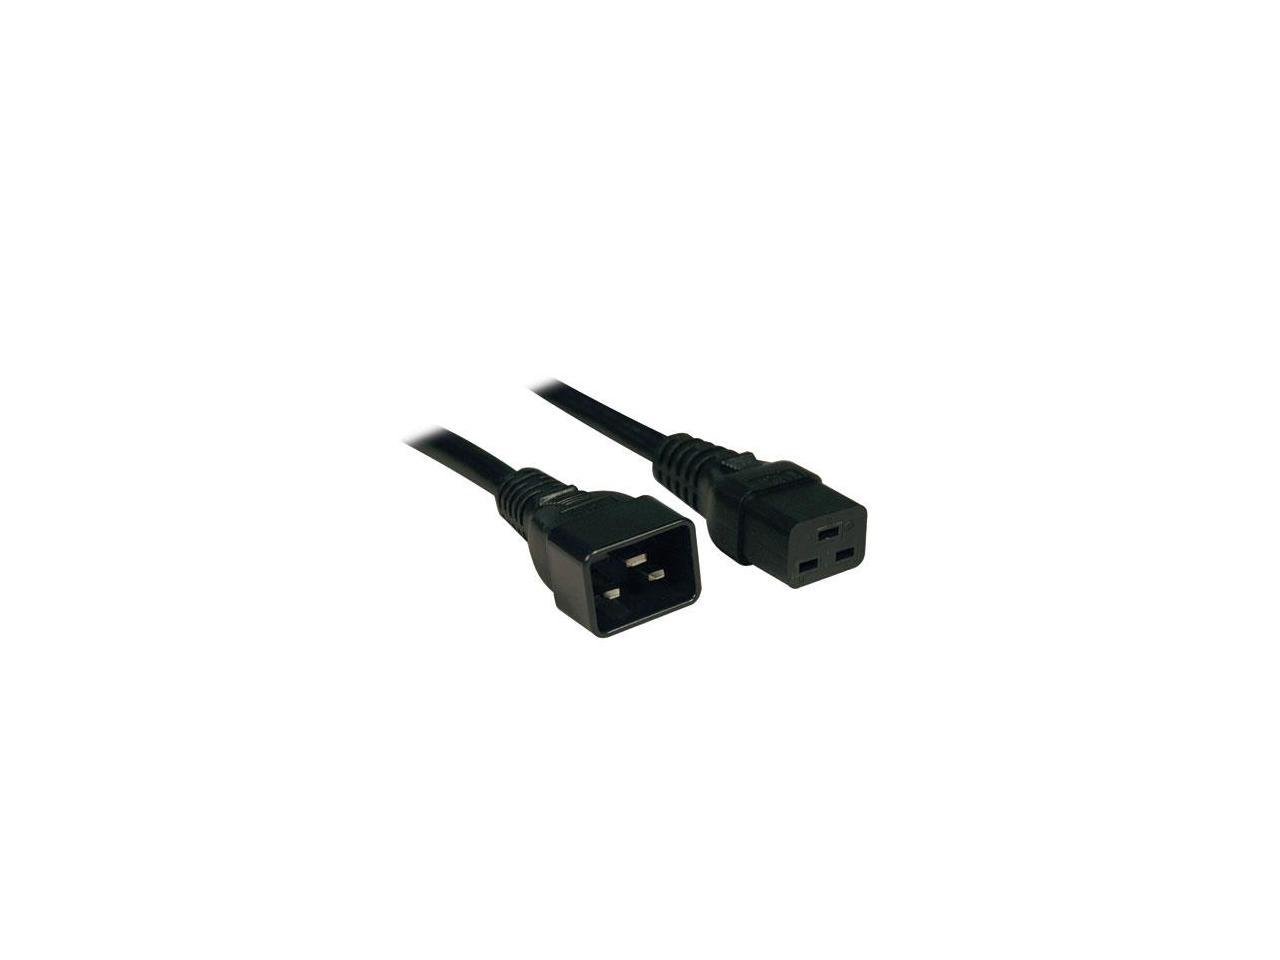 Tripp Lite Heavy-Duty Power Extension Cord, 15A, 14 AWG (IEC-320-C19 to IEC-320-C20), 3 ft. (1 m) (P036-003-15A) - image 2 of 19